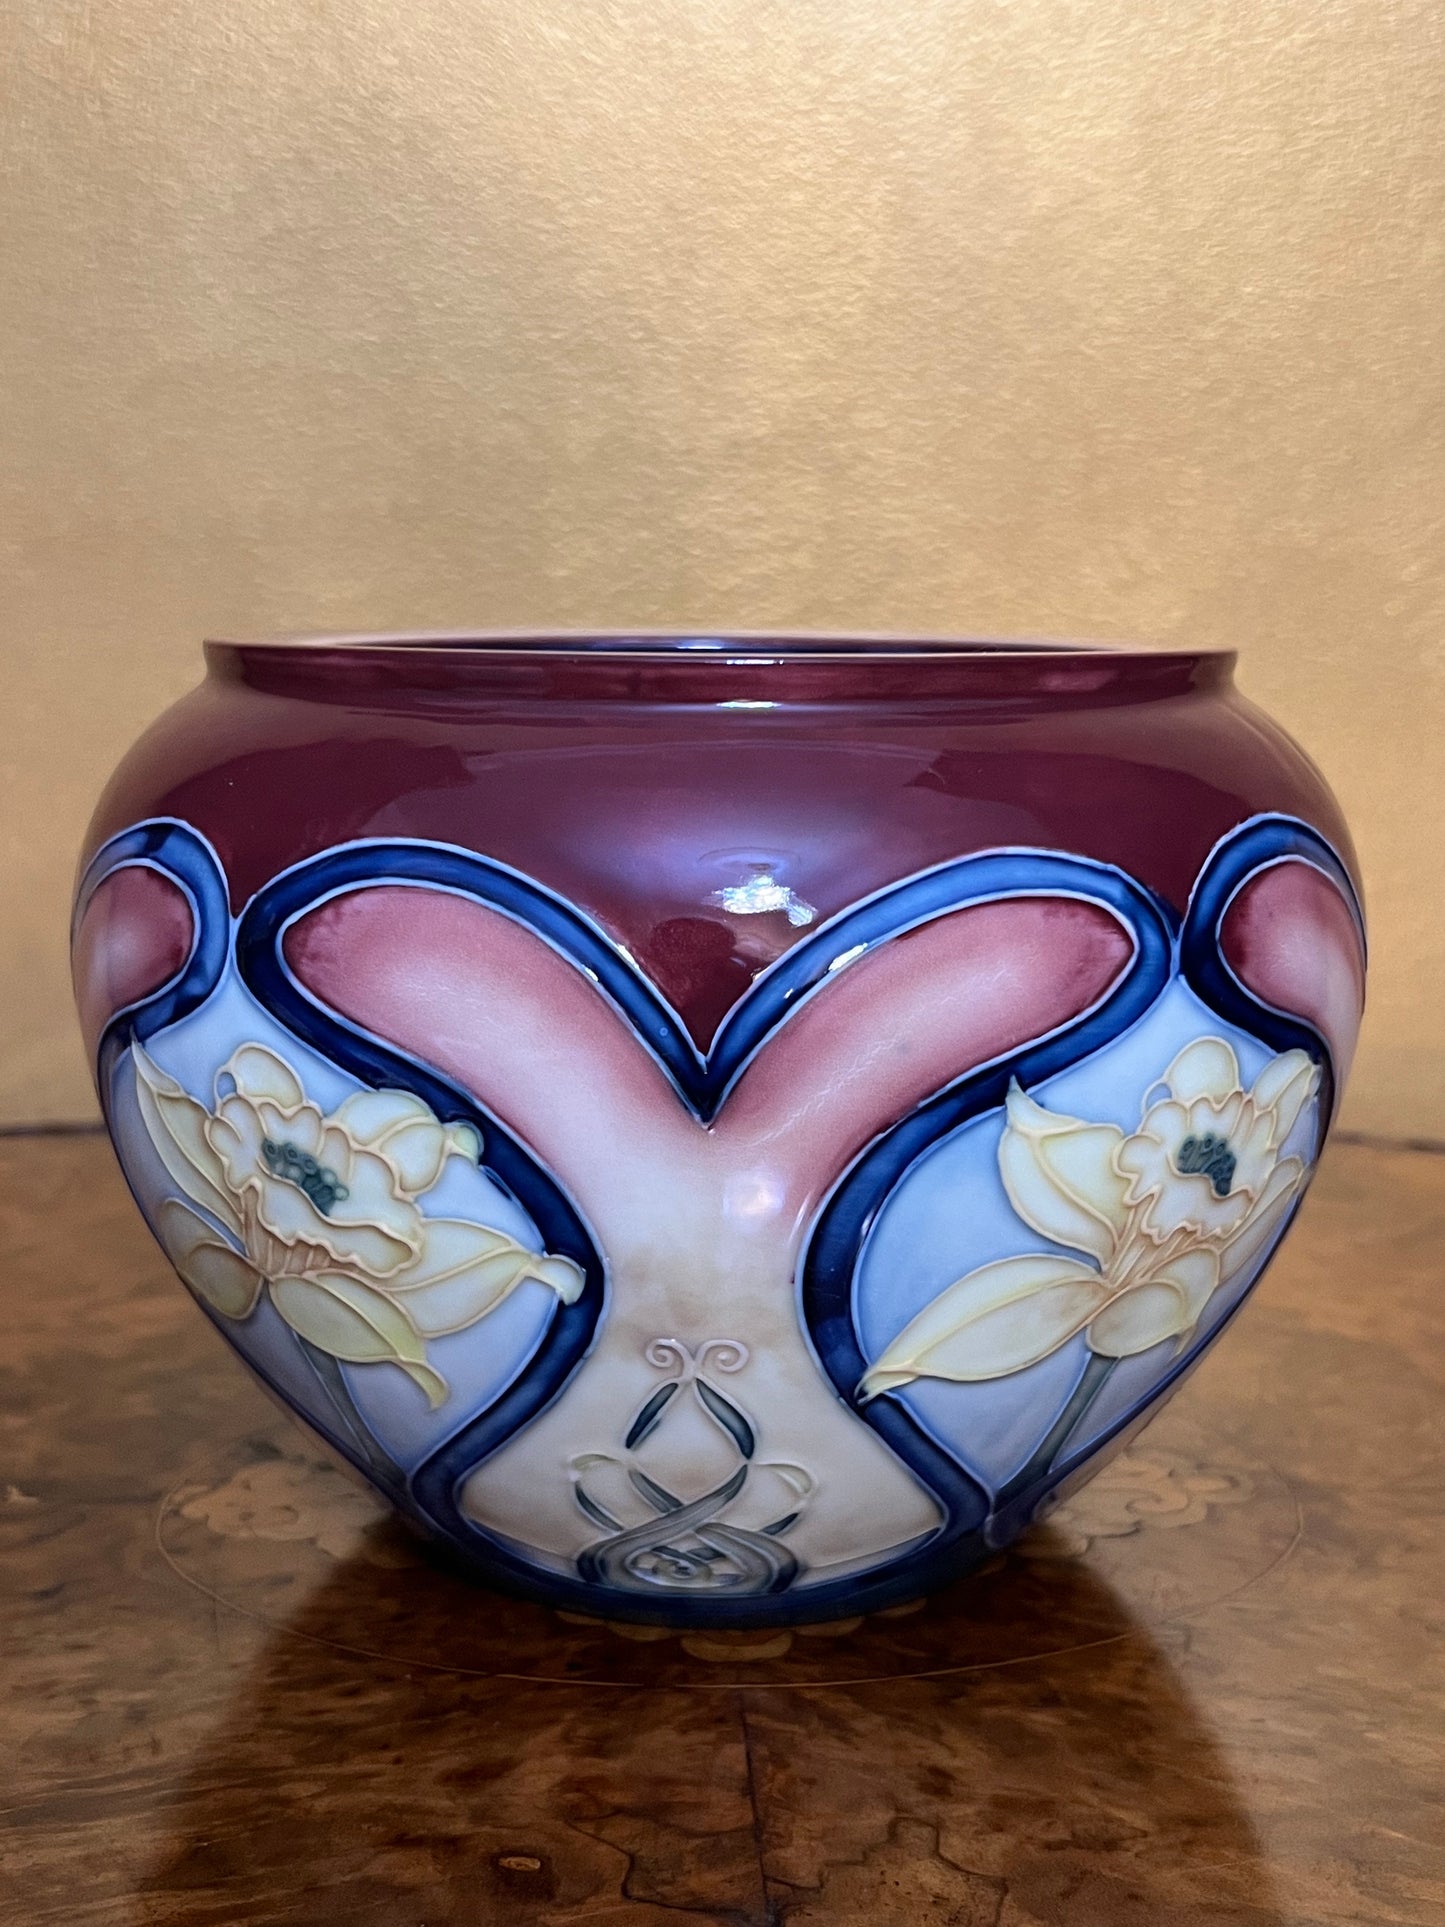 Old Tupton Ware Potter Vase Bowl Hand Painted By Jeanne McDougall